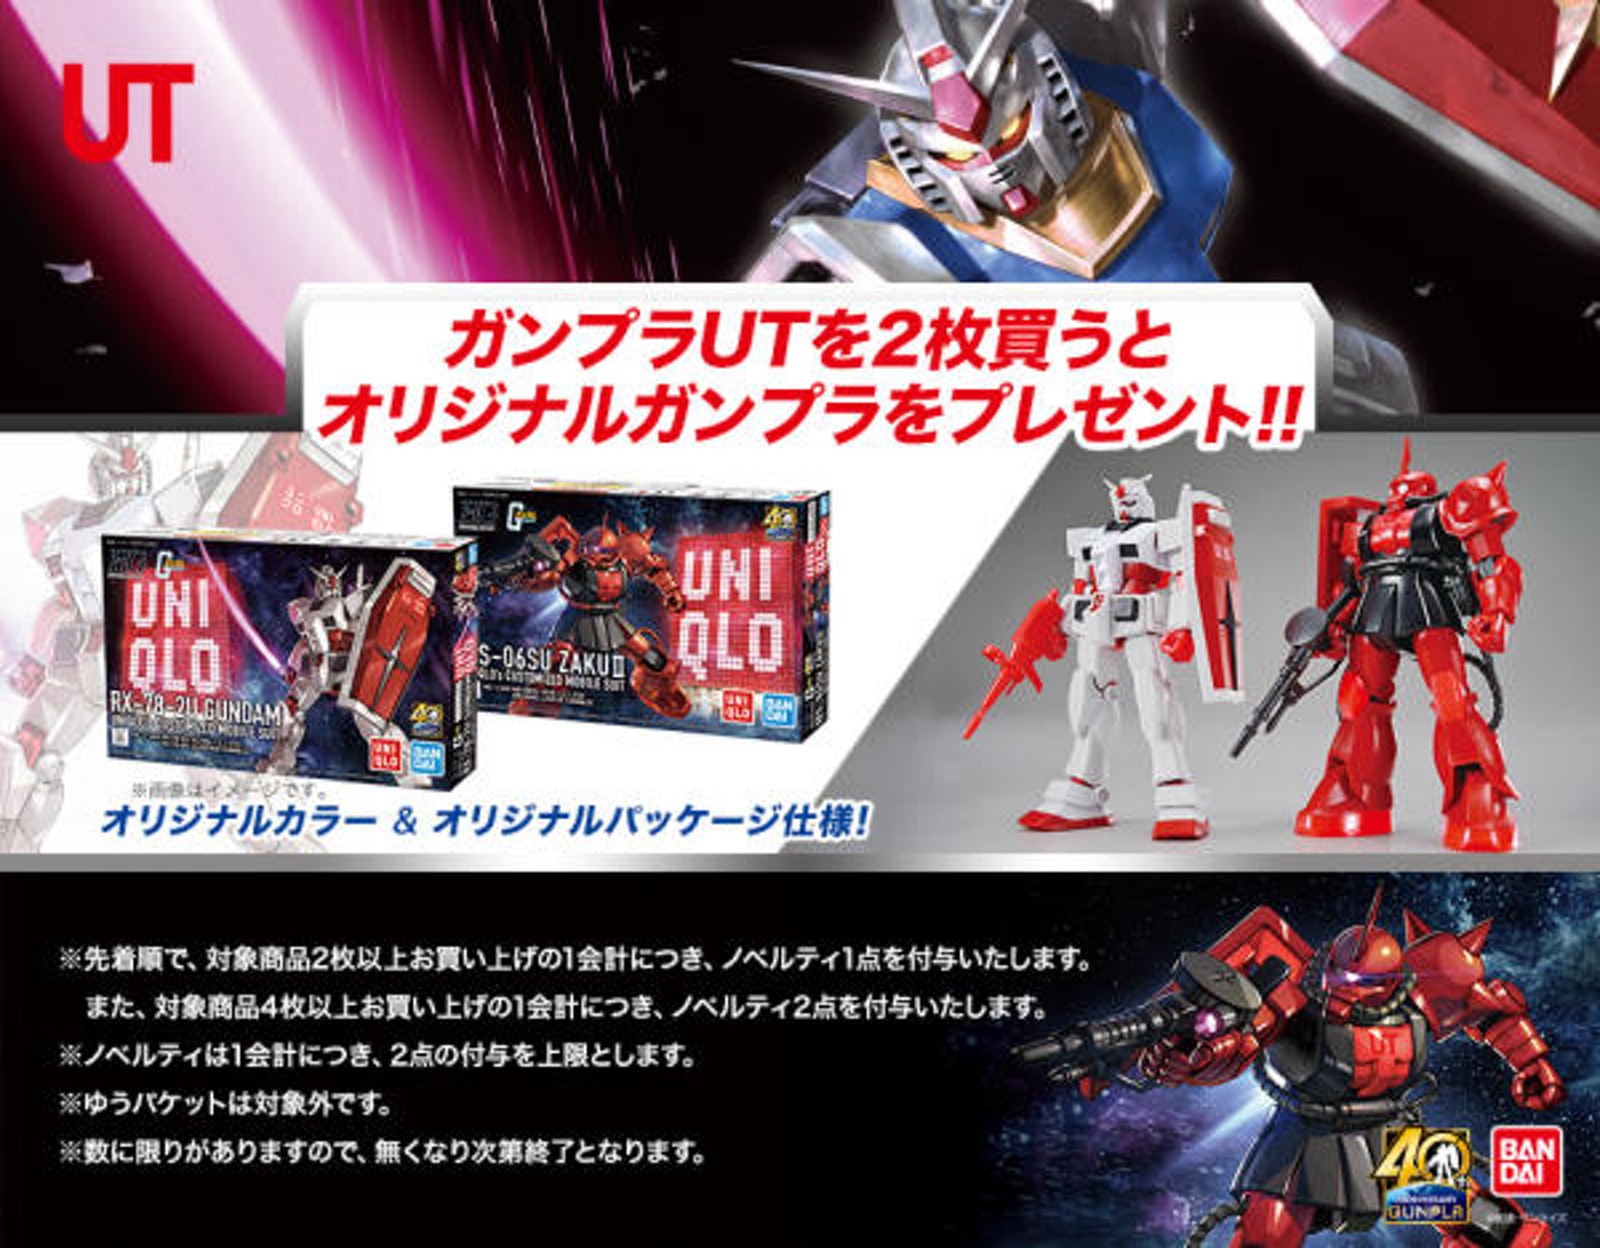 Get A Free Gunpla With Every Purchase Of Two Uniqlo Ut Gunpla 40th Anniversary Graphic Tees